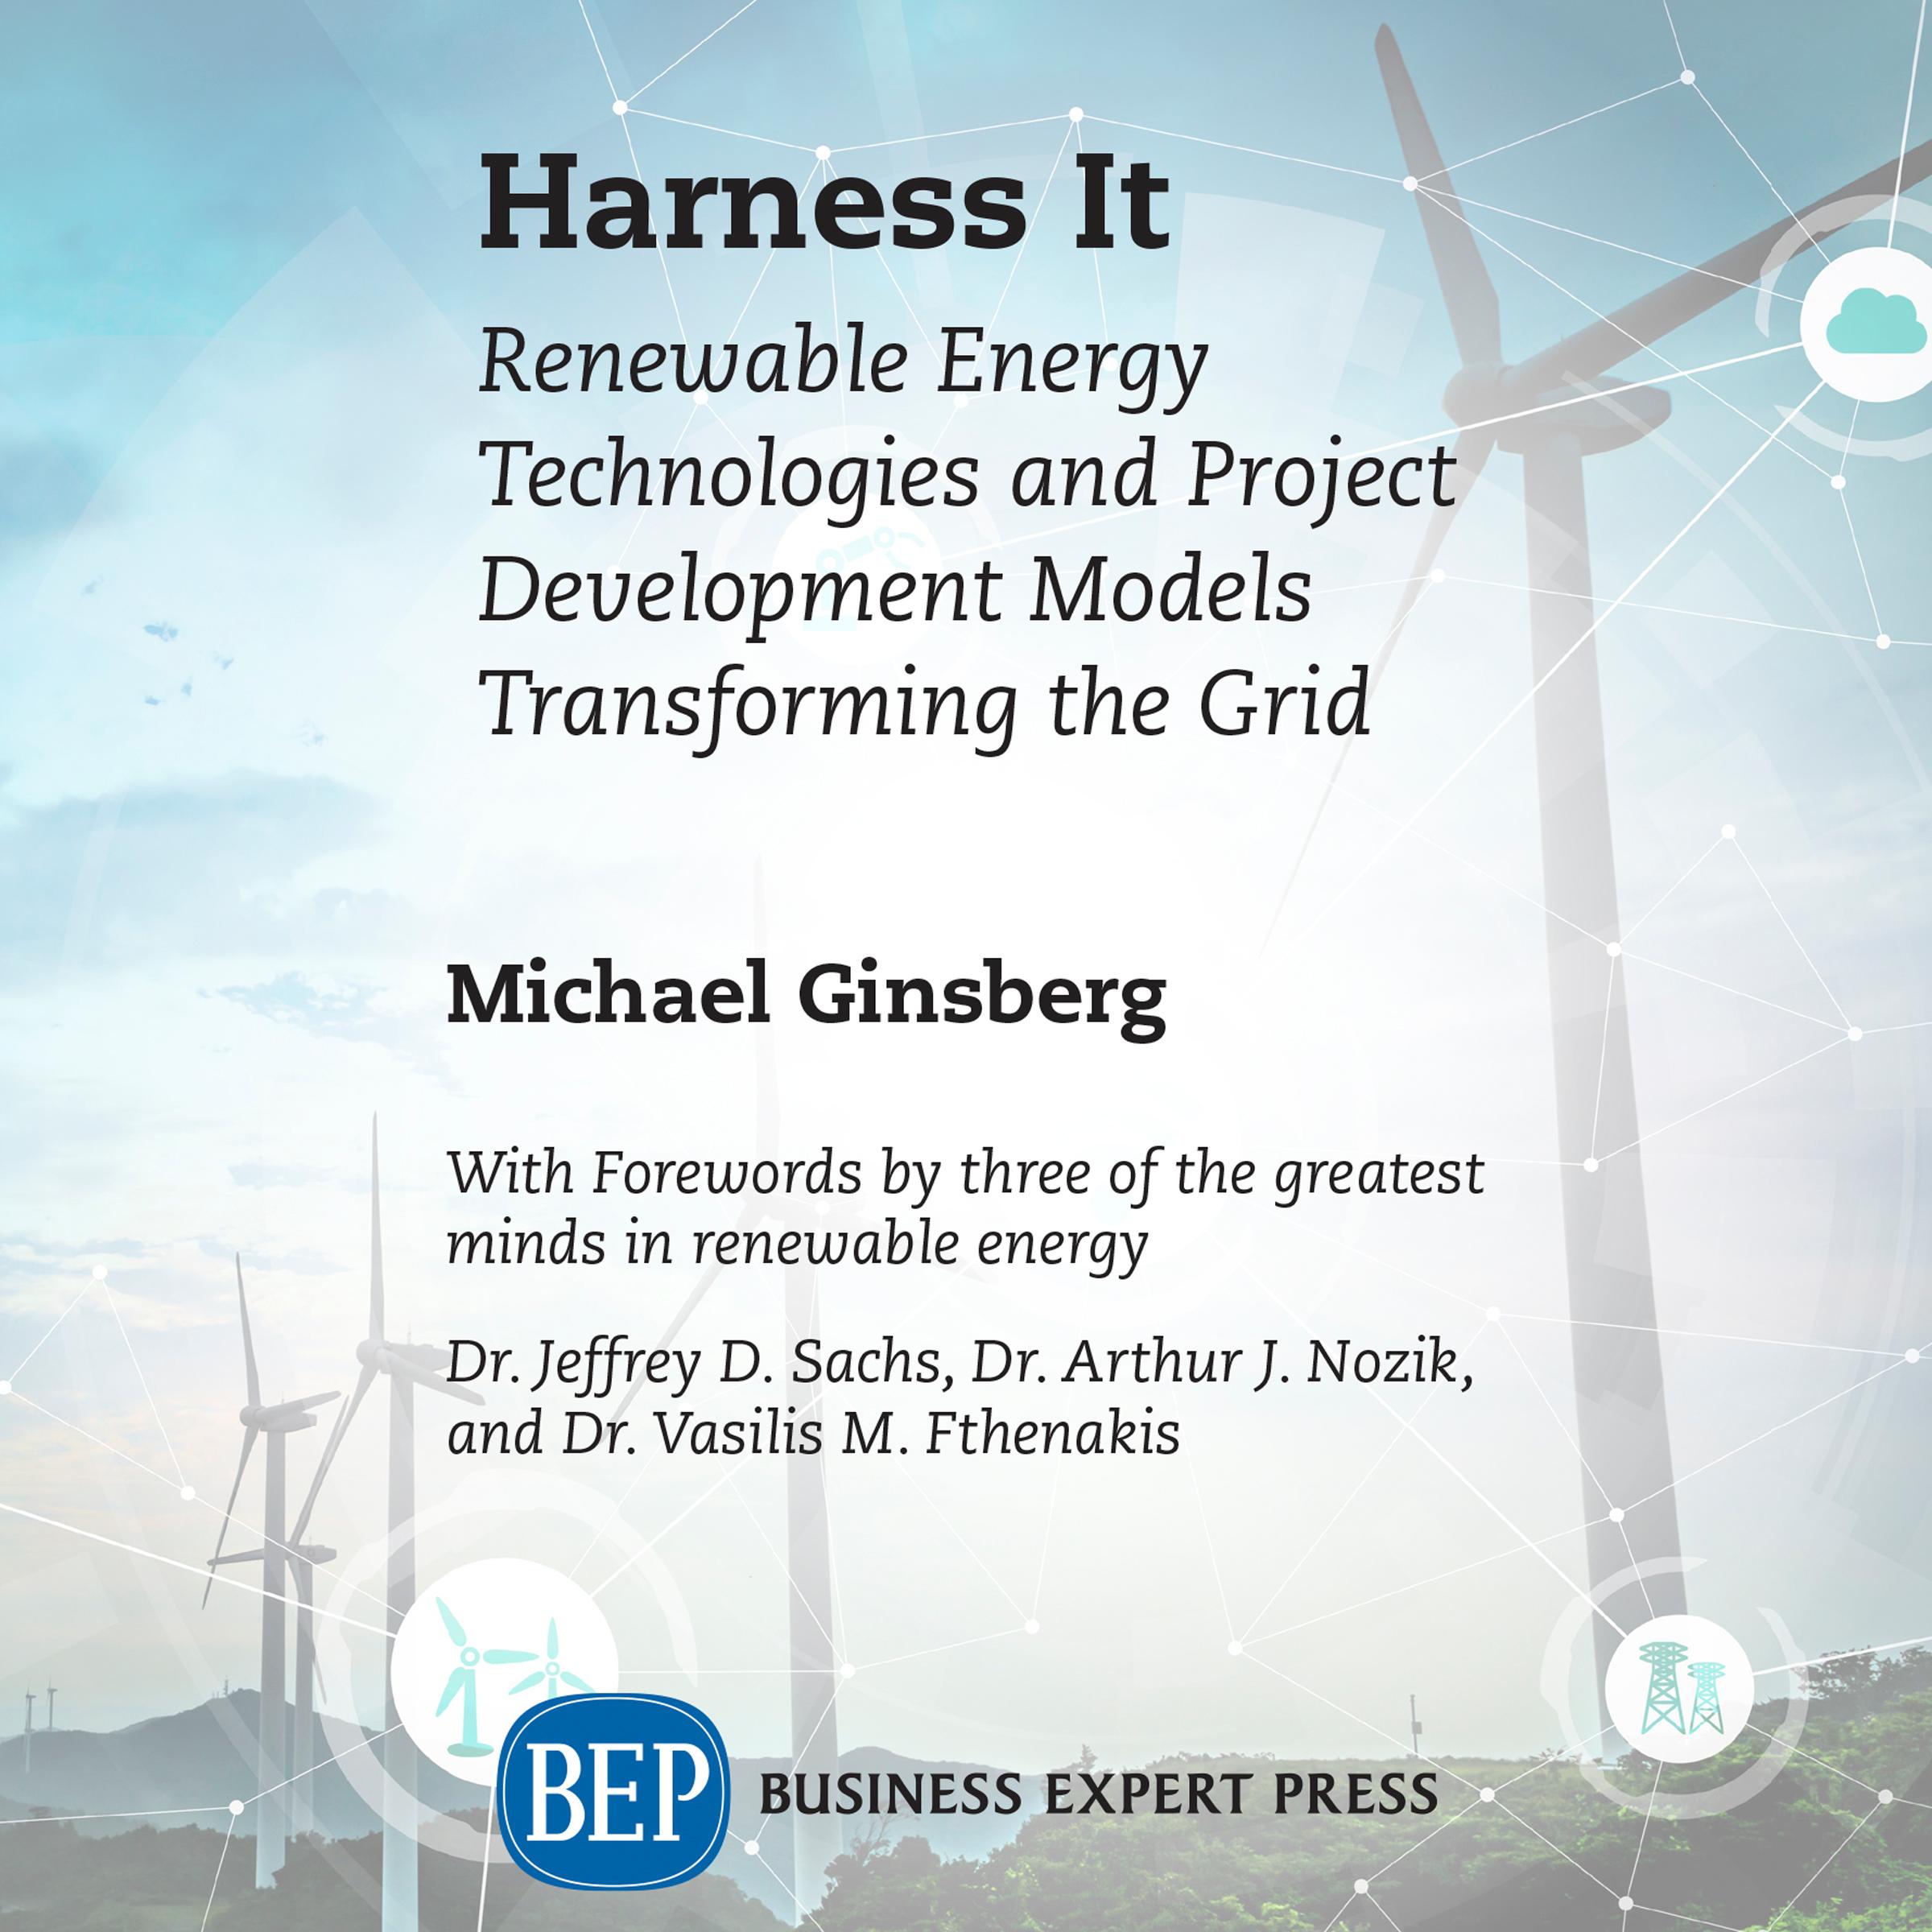 Harness It: Renewable Energy Technologies and Project Development Models Transforming the Grid